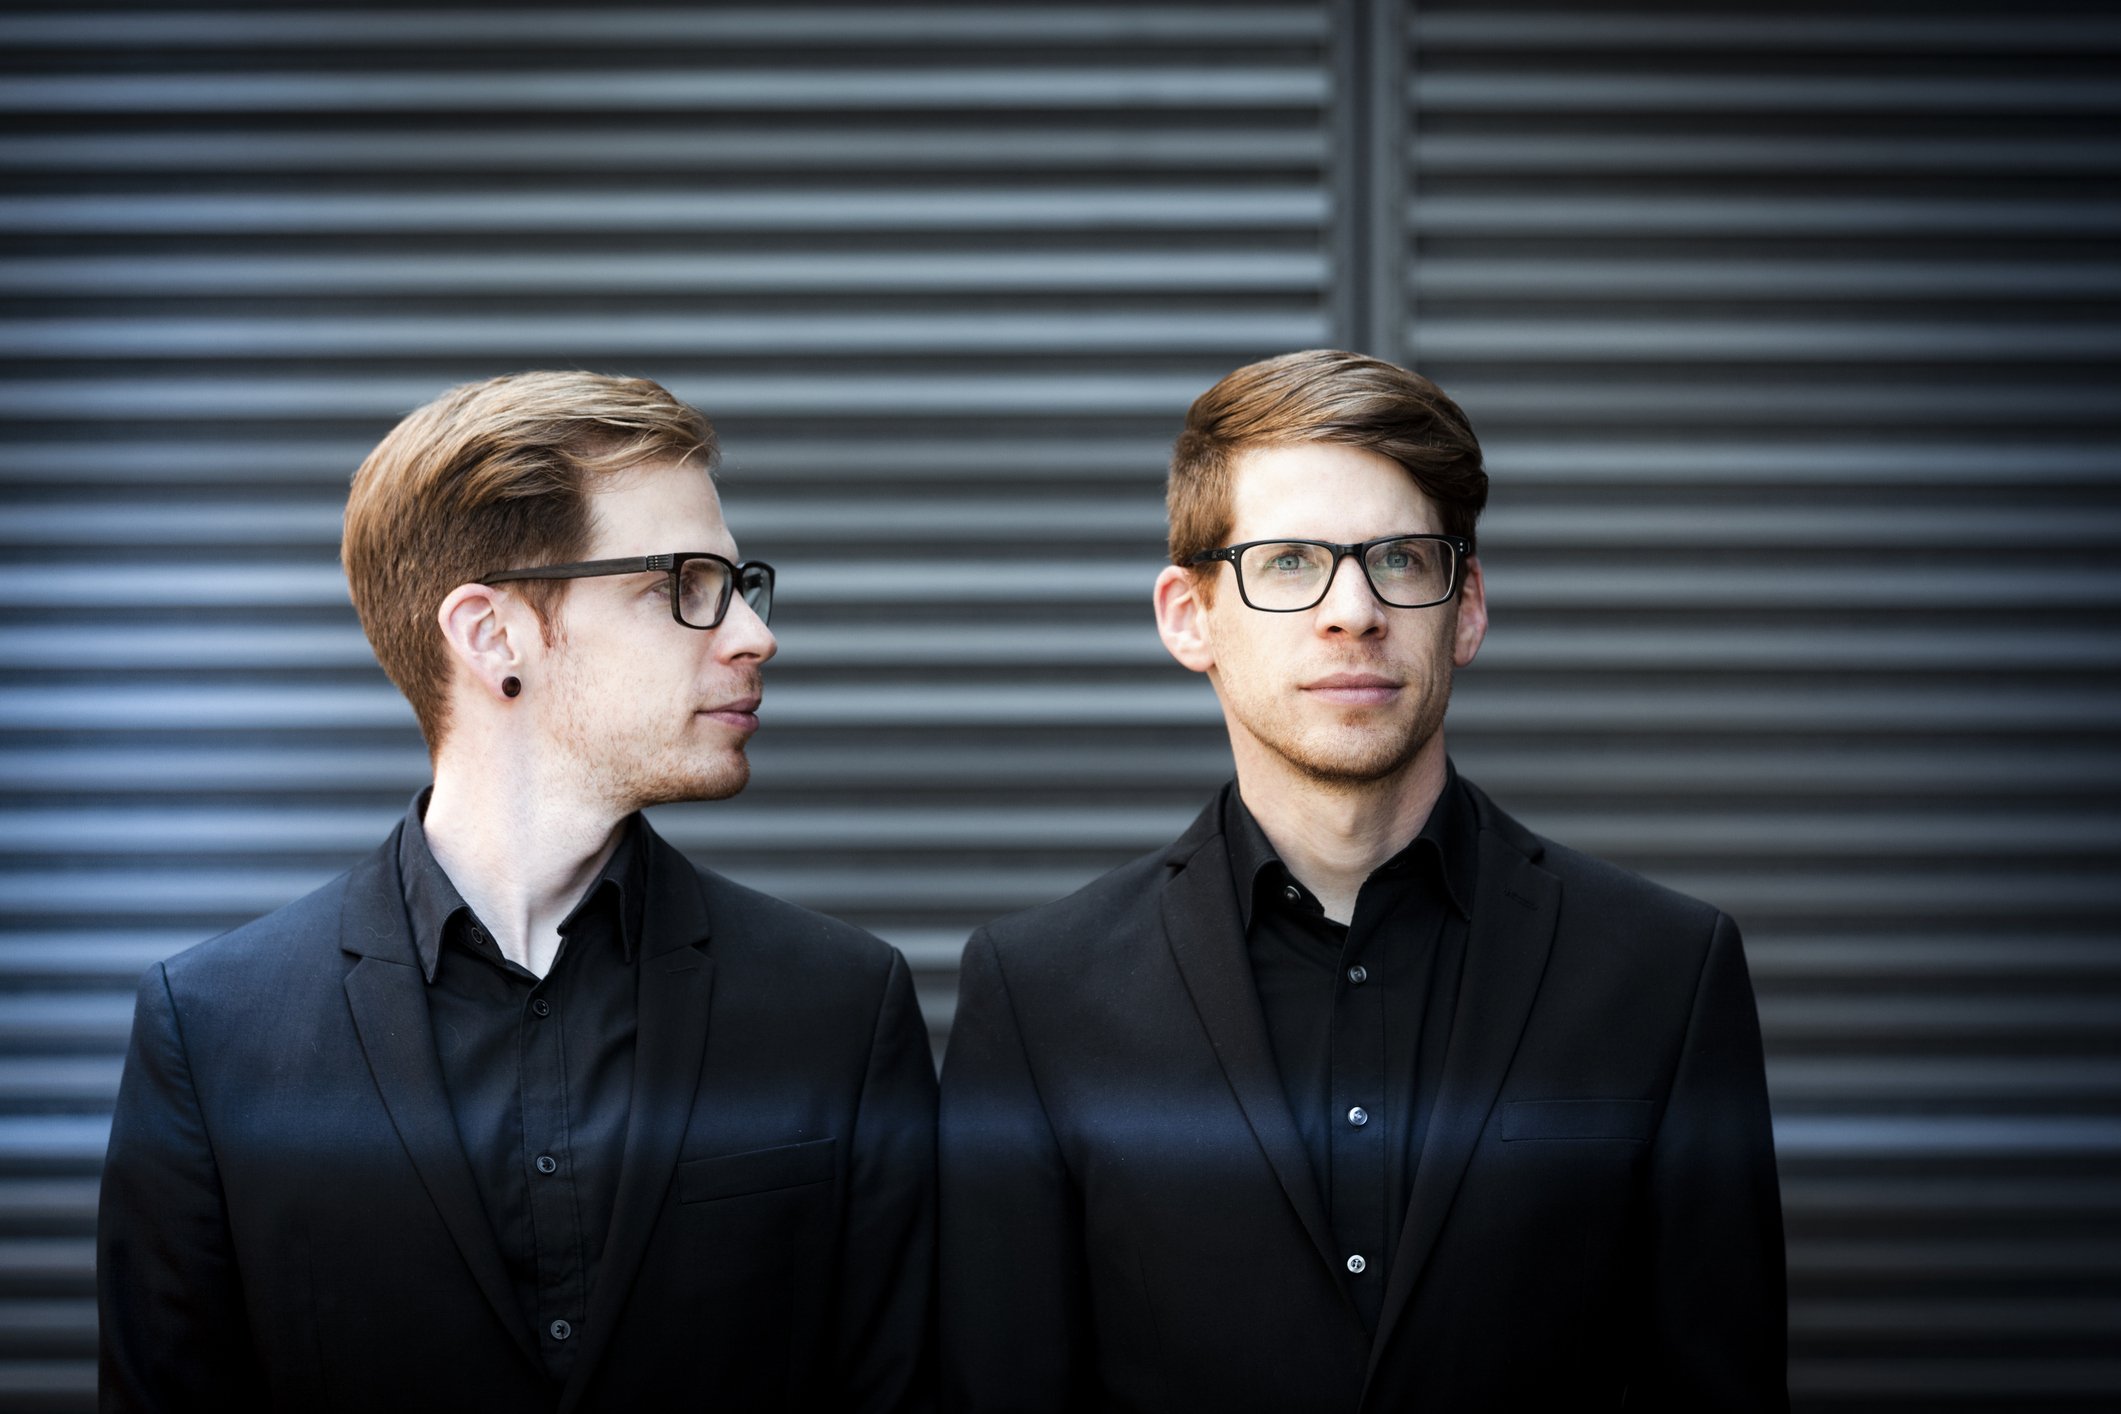 Twin brothers in black suit and glasses | Photo: Getty Images 